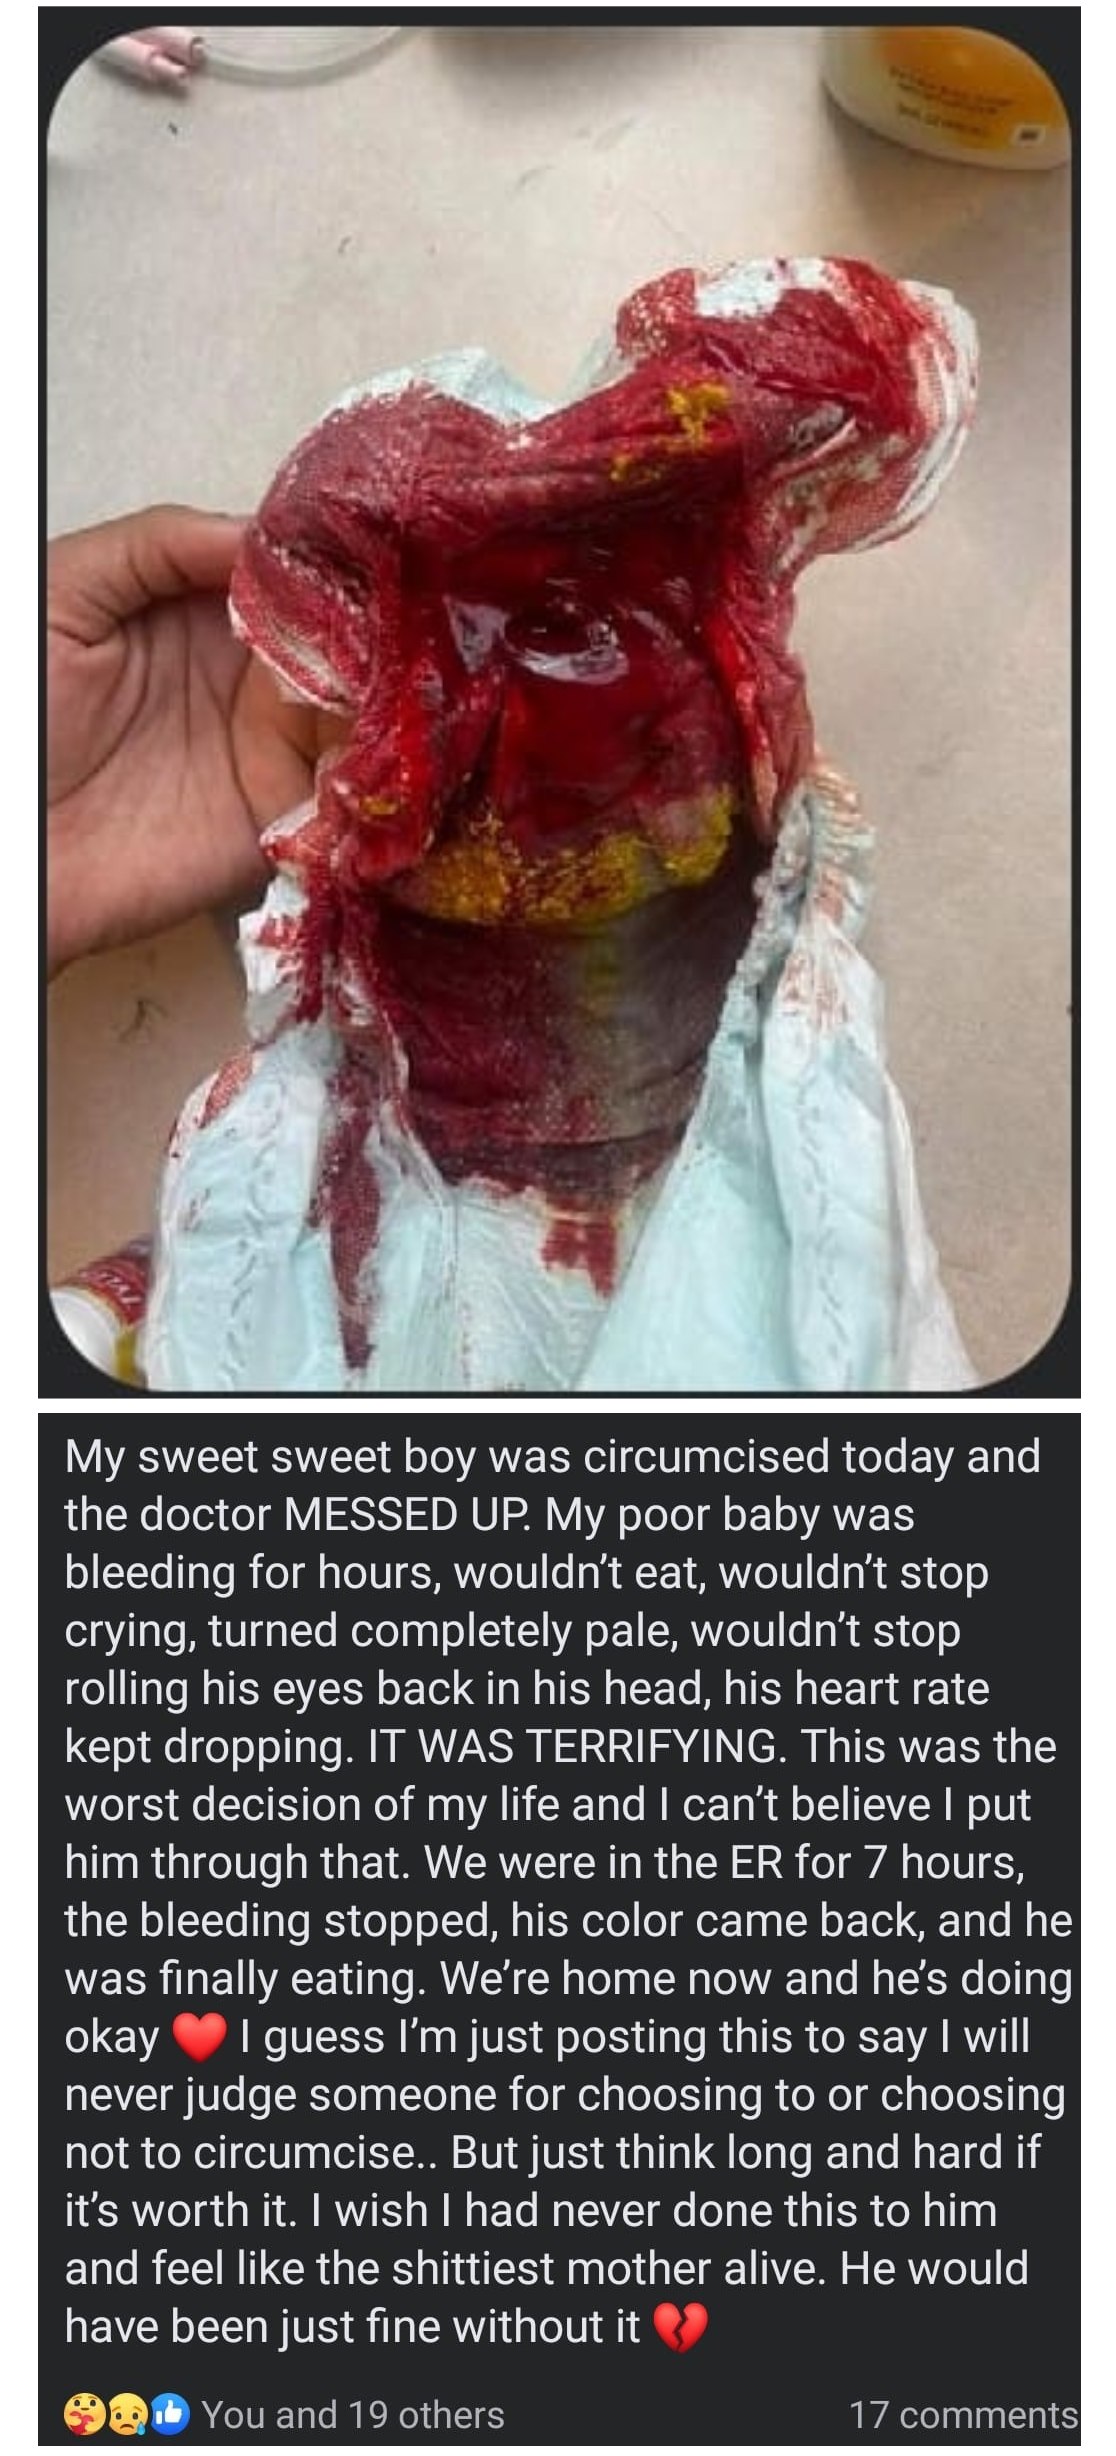 Image: a blood-soaked diaper Text: "My sweet seeet boy was circumicised today and the doctor MESSED UP. 
                               My poor baby was bleeding for hours, wouldn't eat, wouldn't stop crying, turned completely pale,                                wouldn't stop rolling his eyes back in his head, his heart rate kept dropping. IT WAS TERRIFYING. 
                               This was the worst decision of my life and I can't believe I put him through that.                                We were in the ER for 7 hours, the bleeding stopped, his colour came back, and he was finally eating. 
                               We're home now and he's doing okay [heart] I guess I'm just posting this to say I will neer judge someone                                for choosing to or choosing not to circumcise.. But just think long and hard if it's worth it. 
                               I wish I had never done this to him and I feel like the shittiest mother alive.                                He would have been just fine without it. [broken heart]